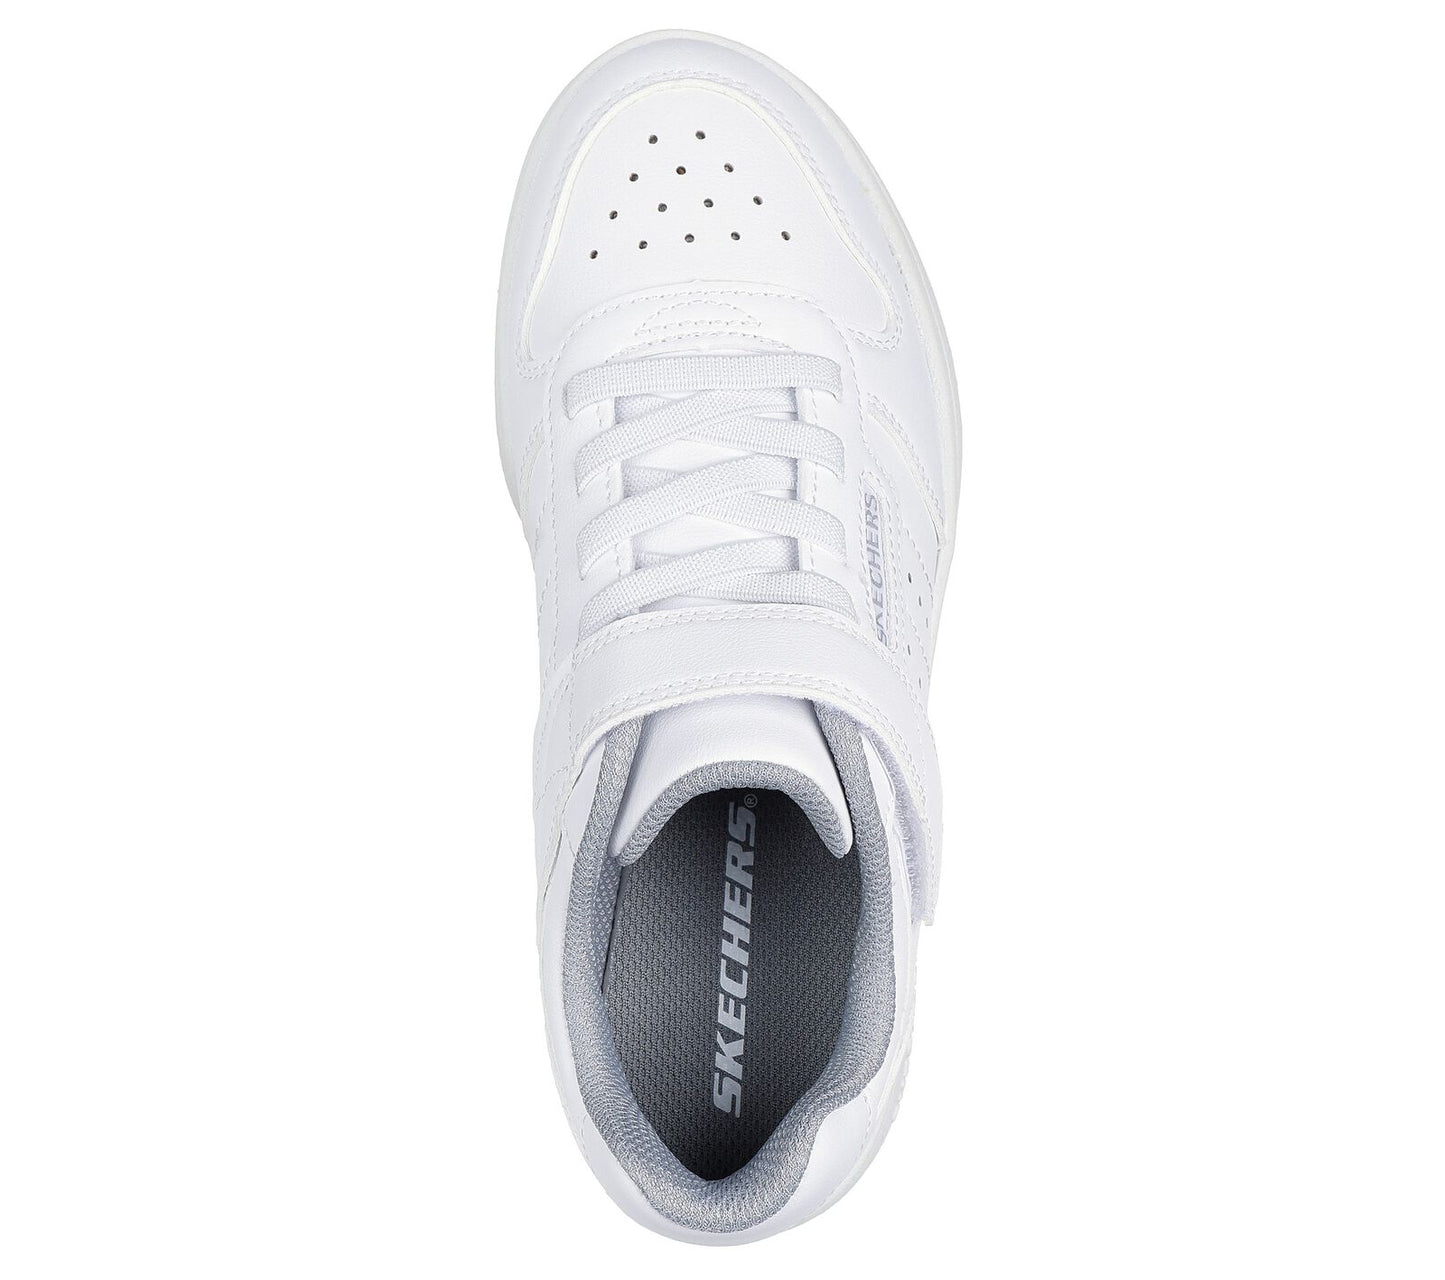 Skechers Quick Street, a sporty white trainer with grey lining, featuring the Skechers logo. Velcro fastening with flat stretch bungee laces. Top view.